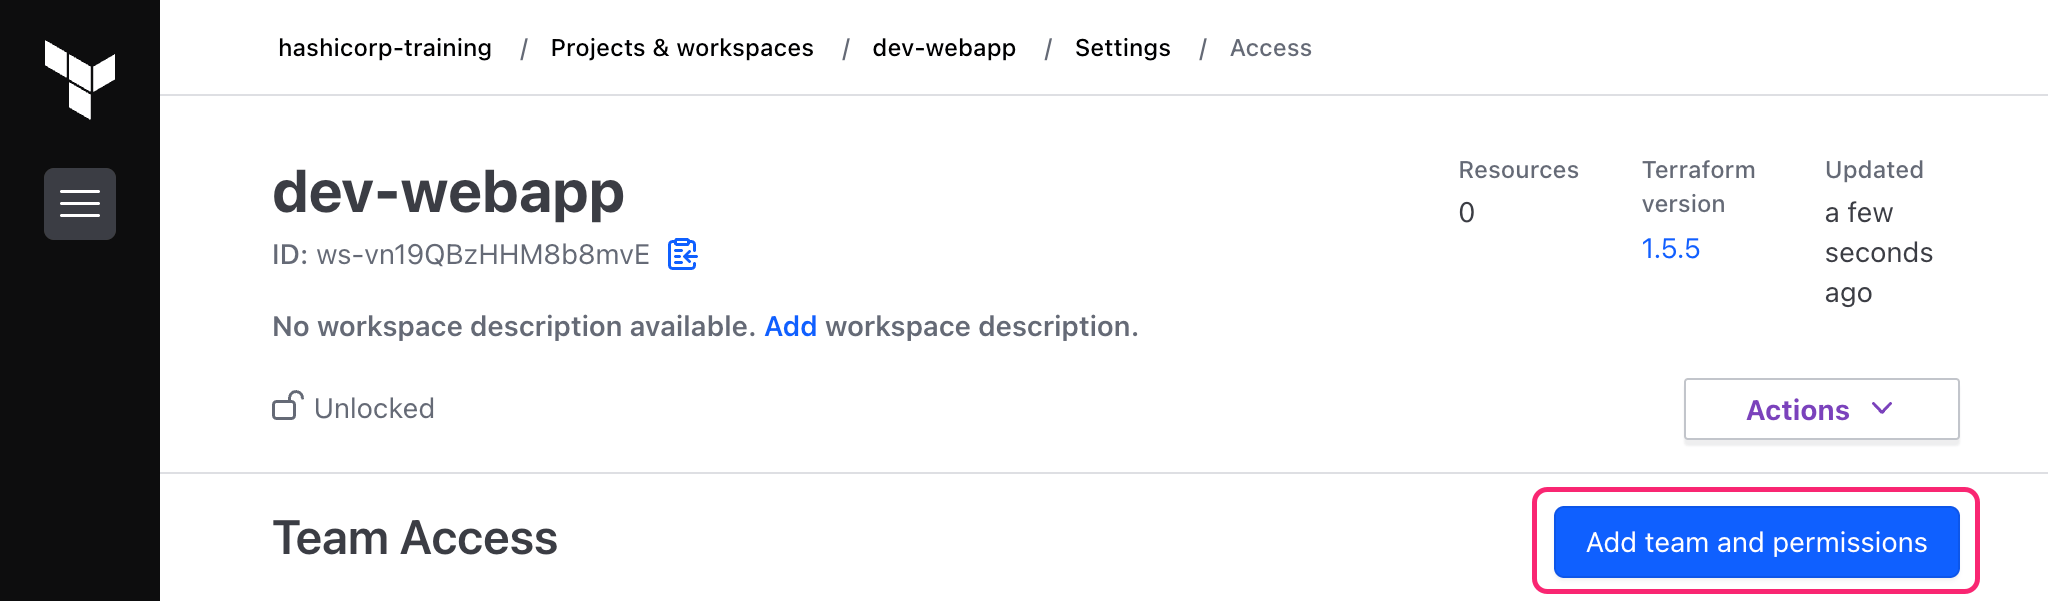 Assign team access to workspace